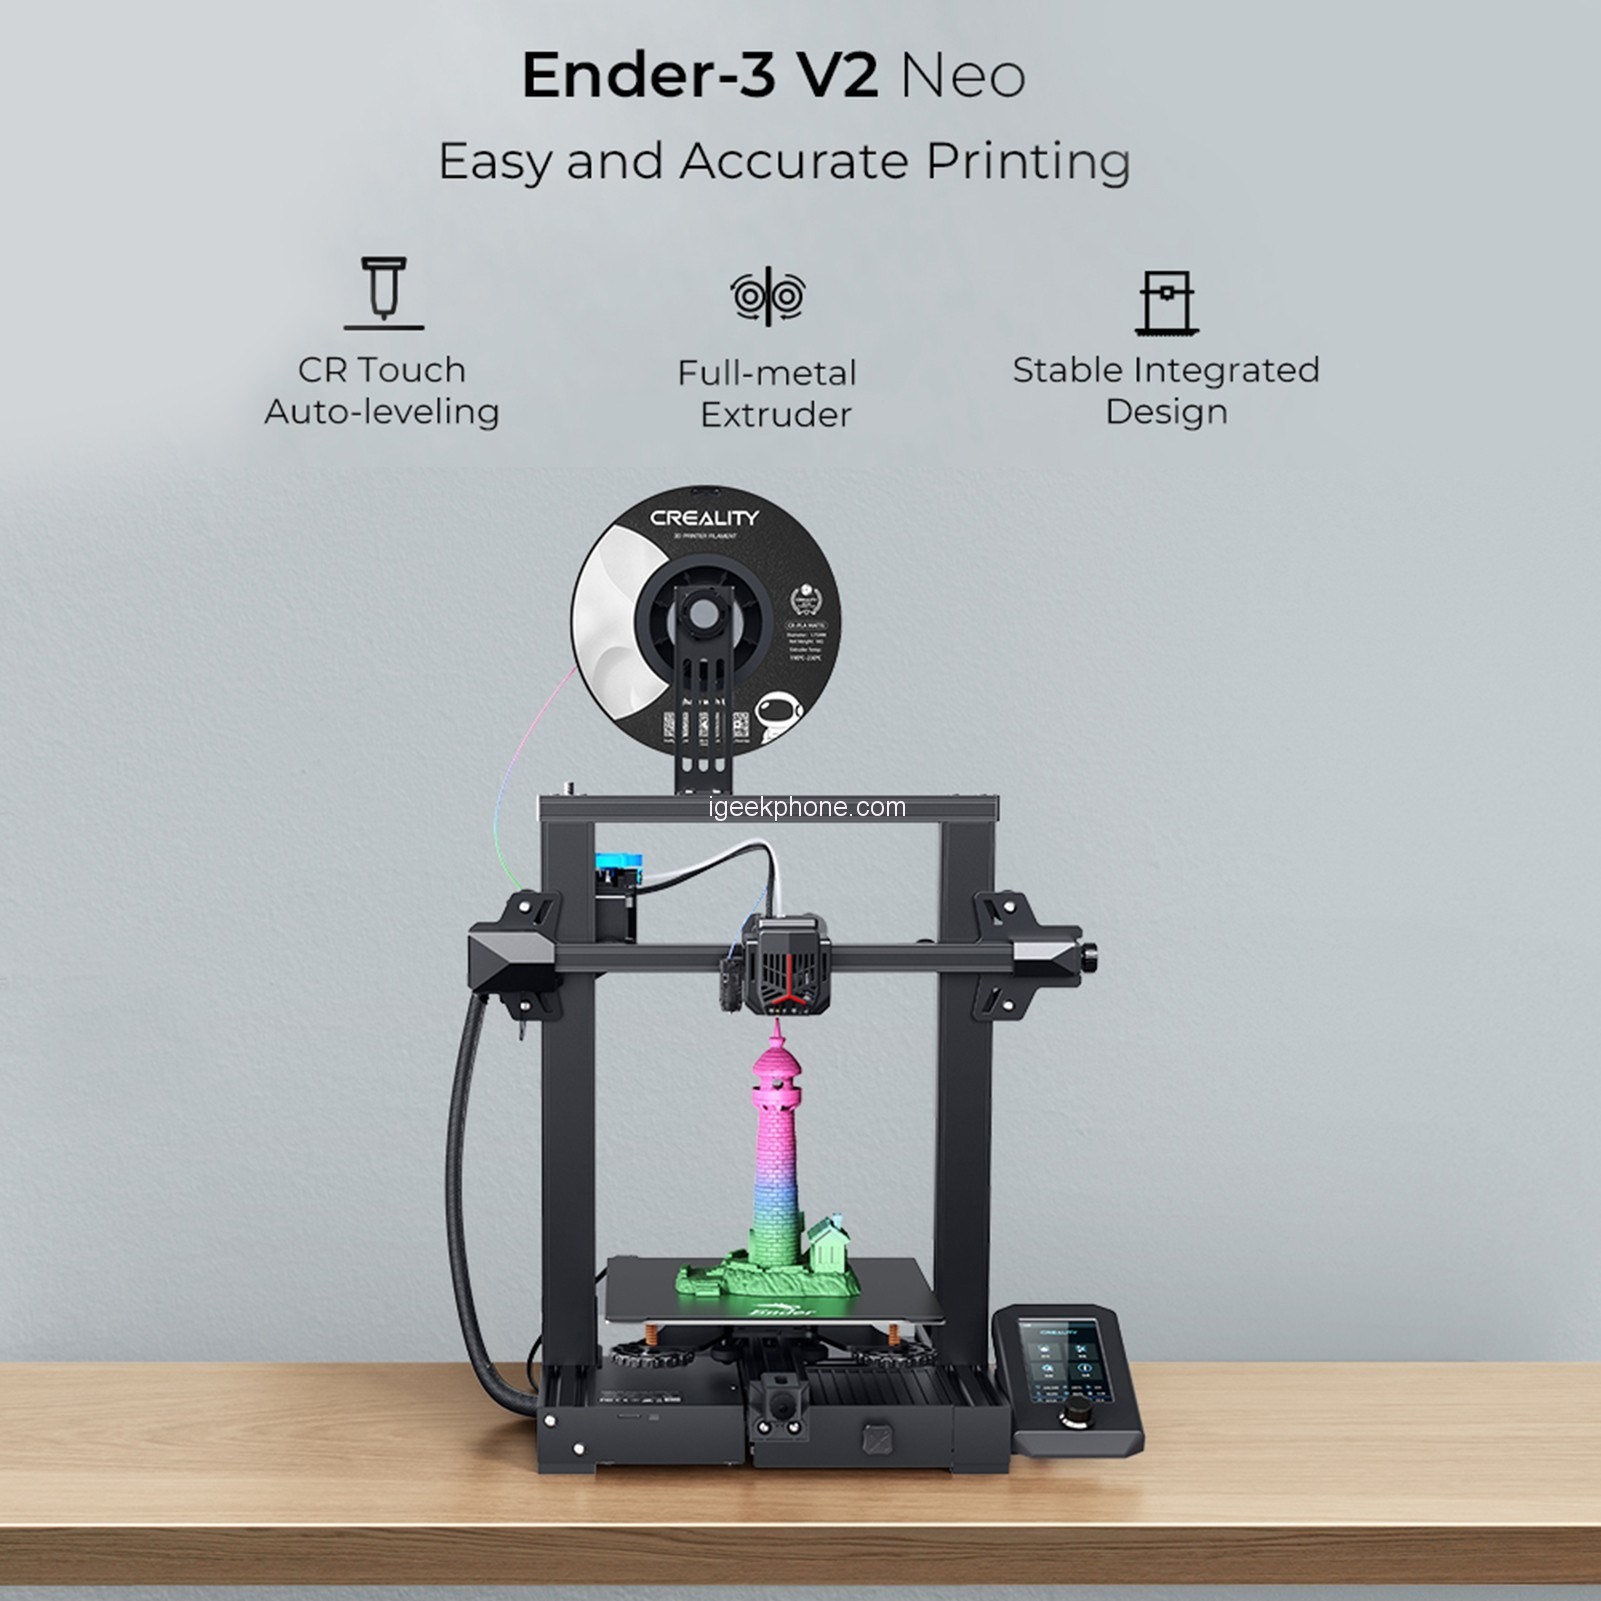 Creality Ender-3 V2 Neo Features